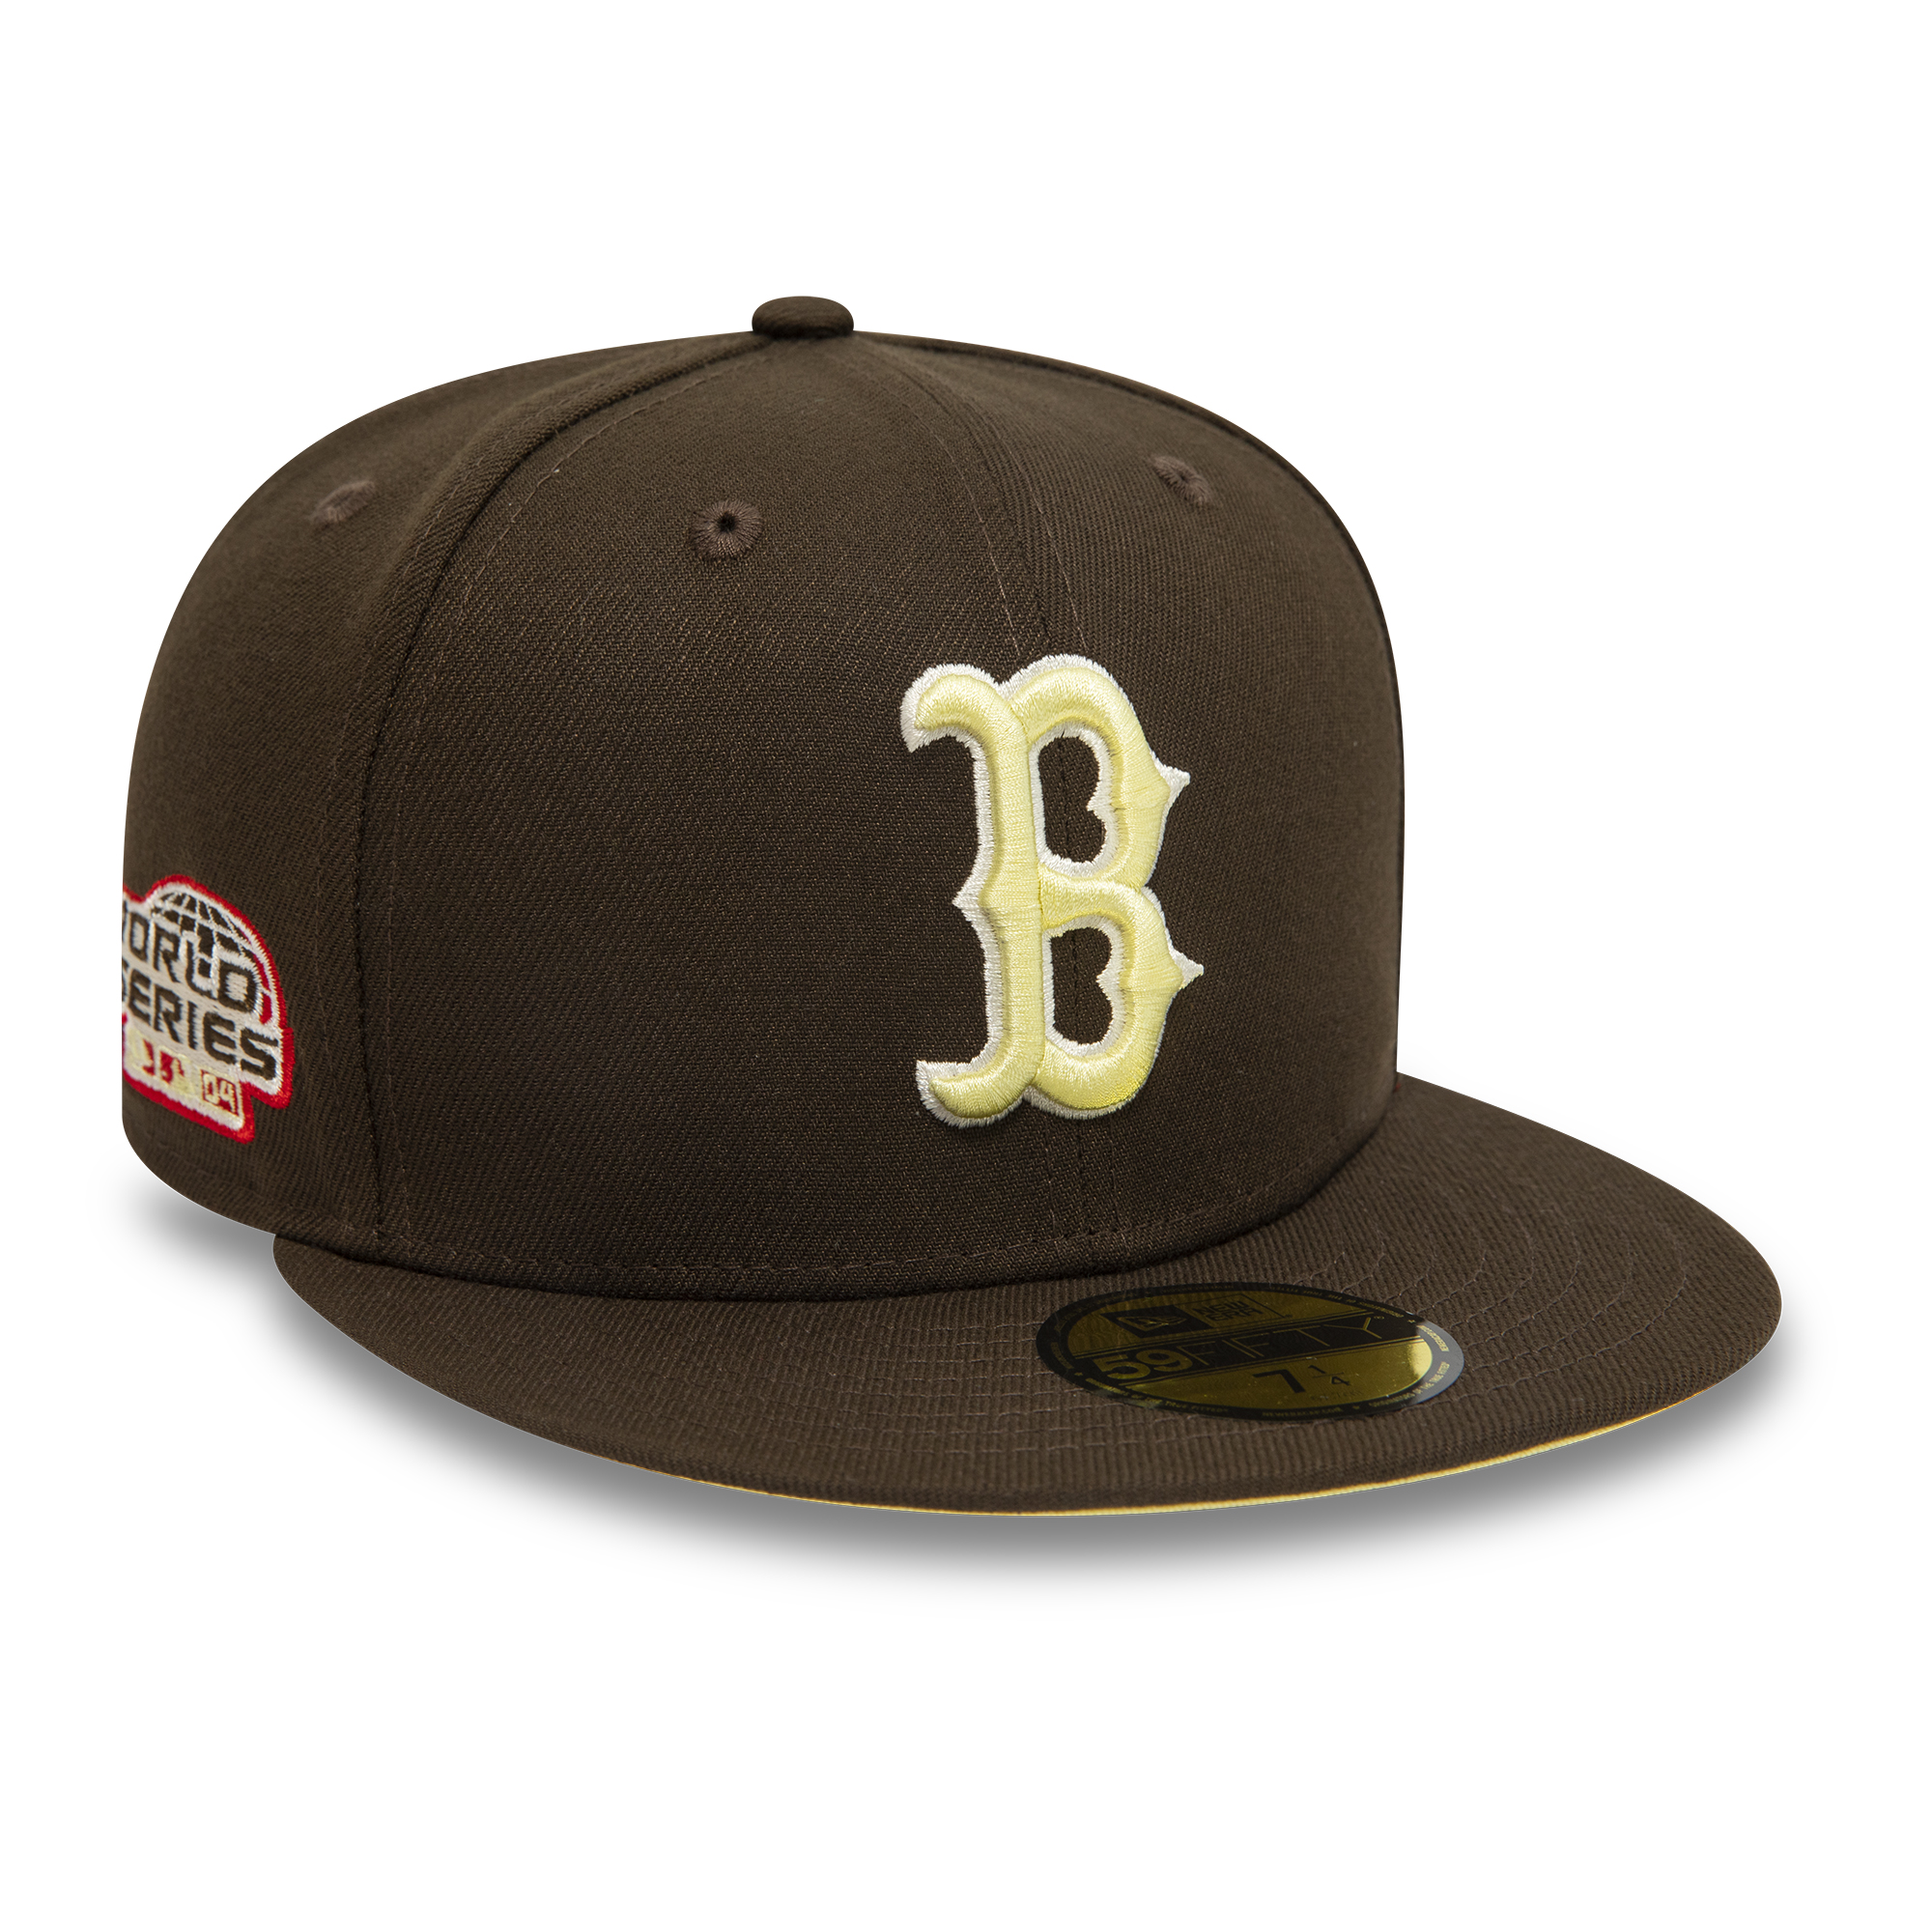 Official New Era Boston Red Sox MLB Brown 59FIFTY Fitted Cap B8067_253 ...